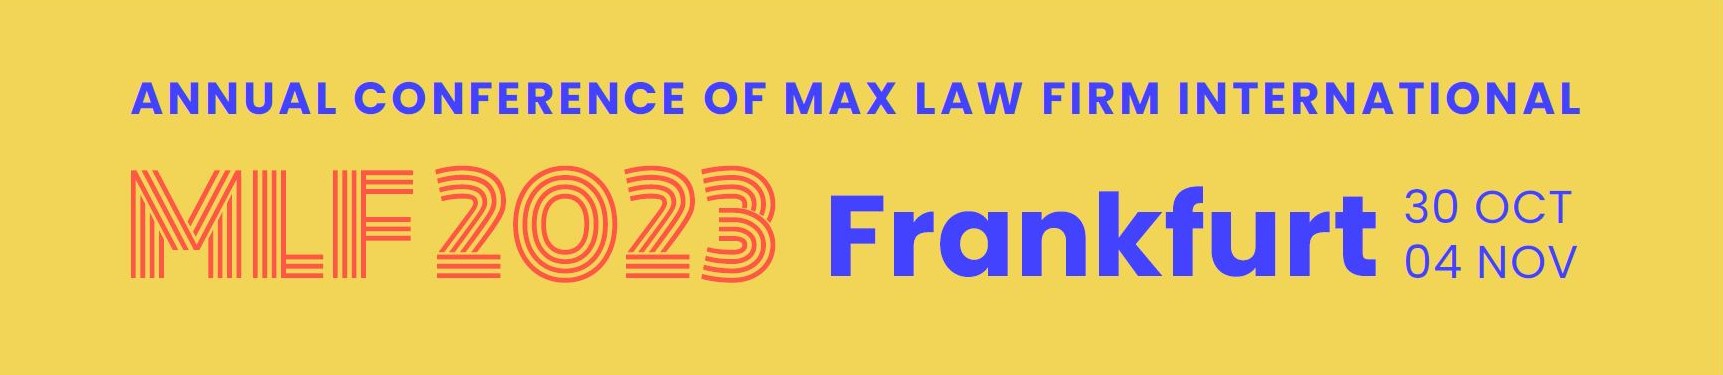 A banner to announce the annual conference of max Law Firm International in 2023 Frankfurt